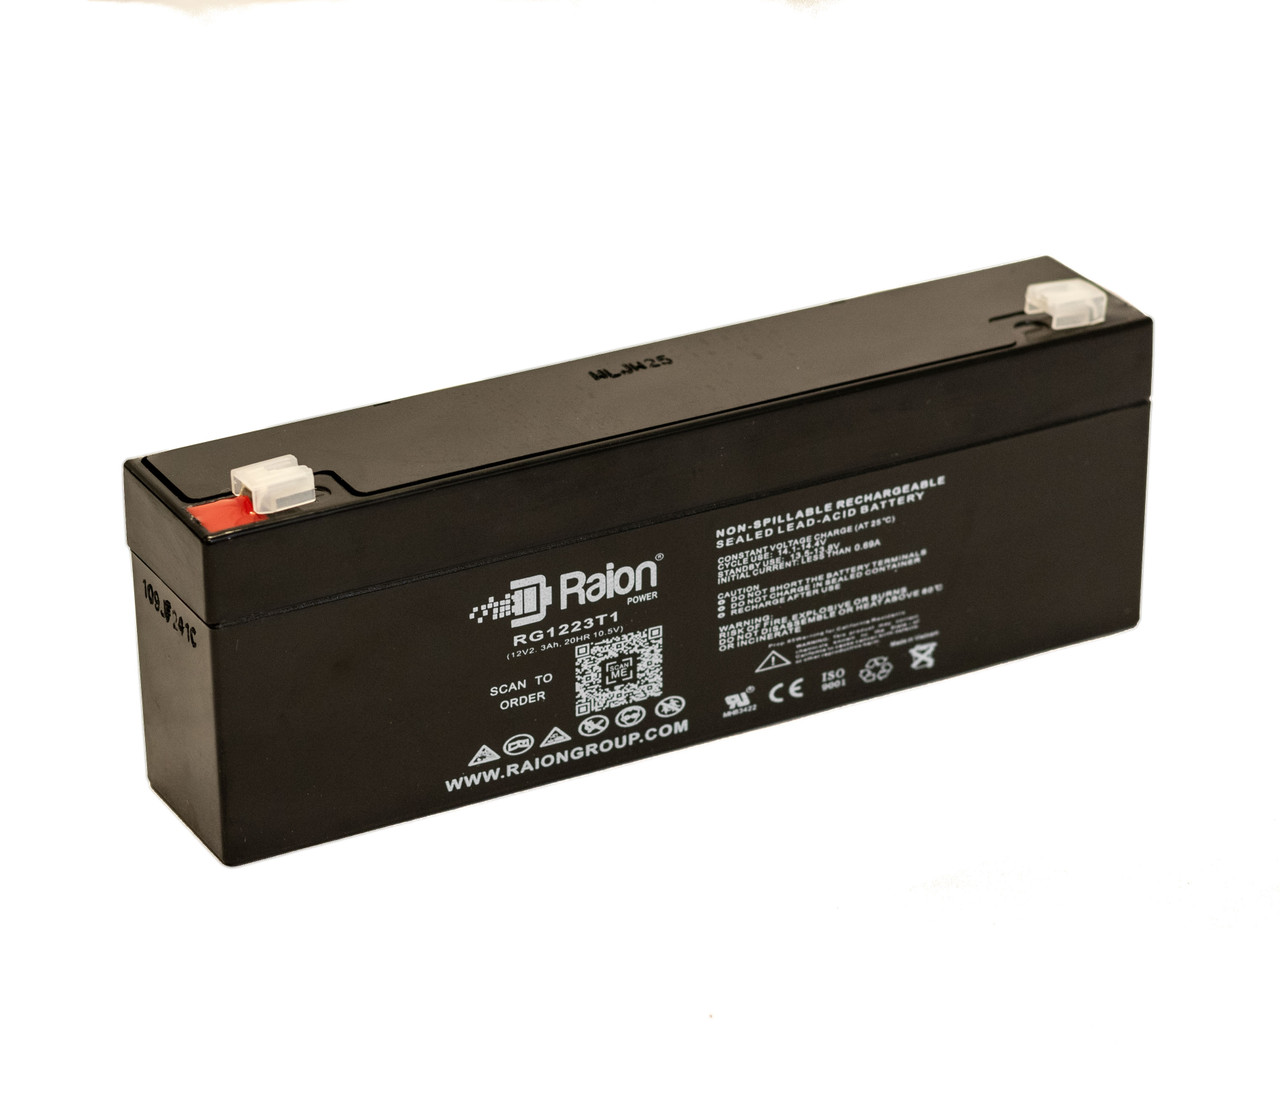 Raion Power RG1223T1 Replacement Battery for Prostar PR1223